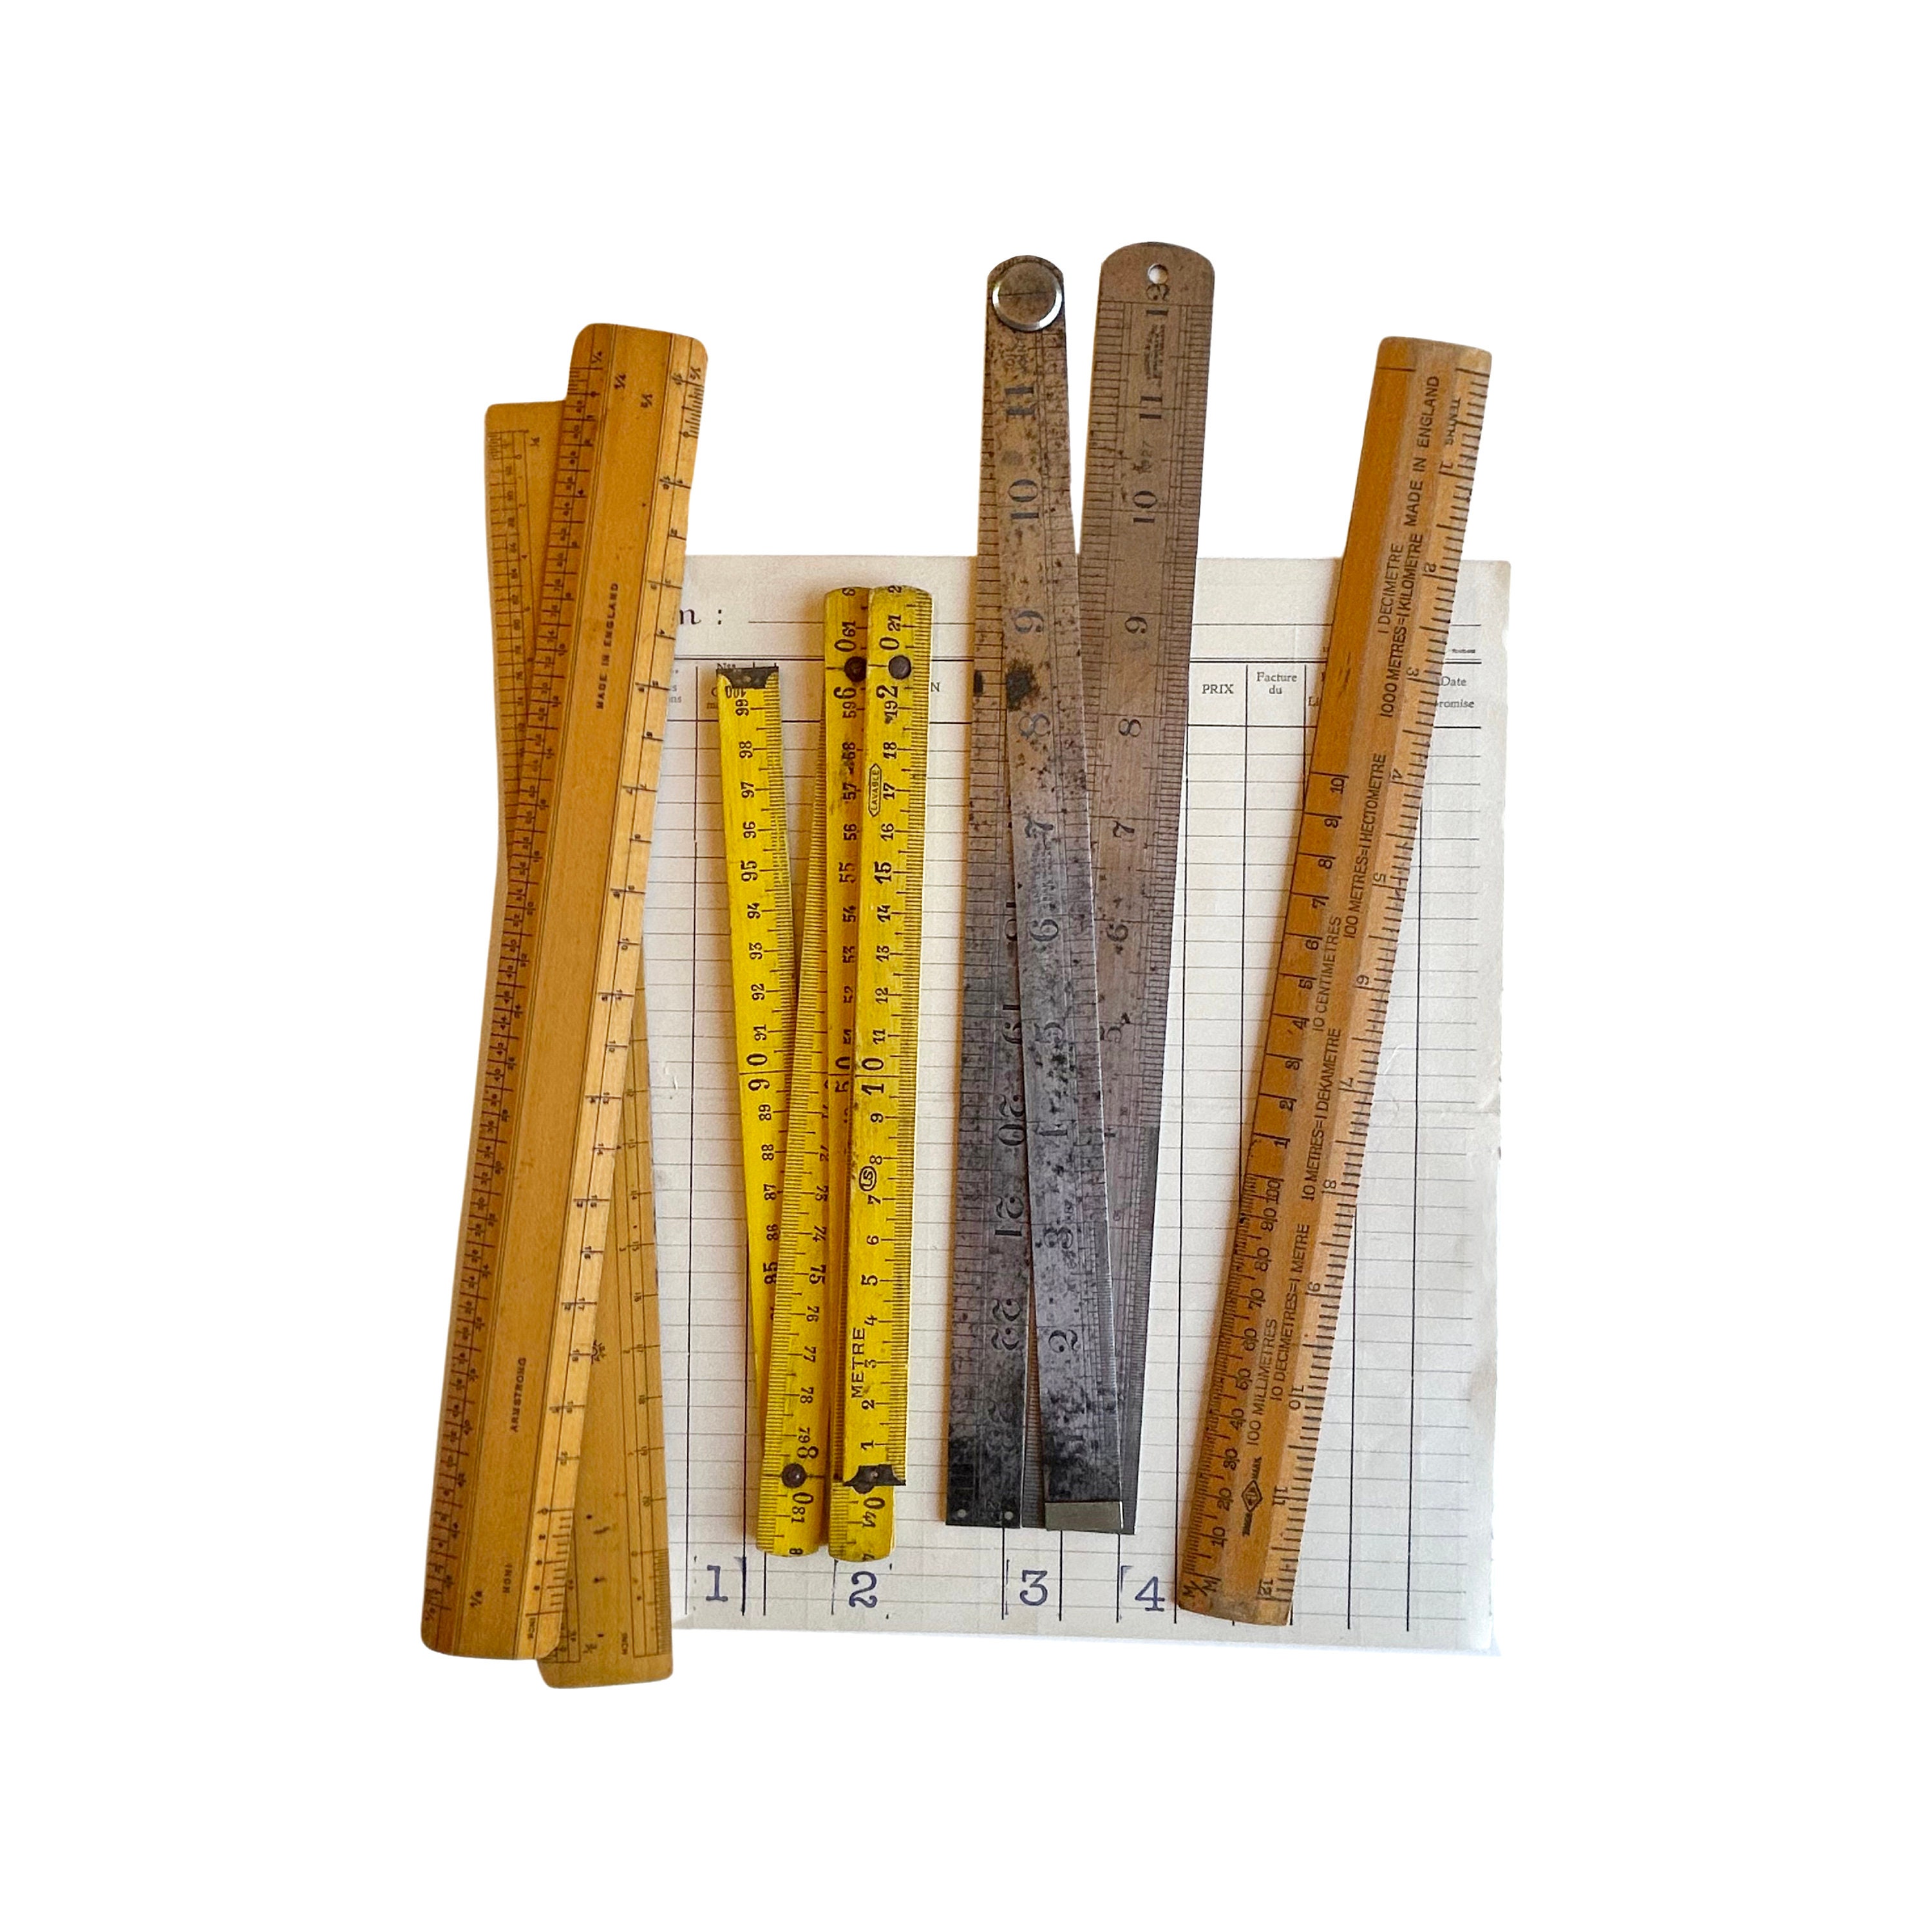 10 Pieces 36 Inches Natural Wood Yard Stick Ruler Wooden Yardstick with  Hang Hole Metal Tips Yardstick Ruler Metal Ends Meter Stick for Kids  Clothing